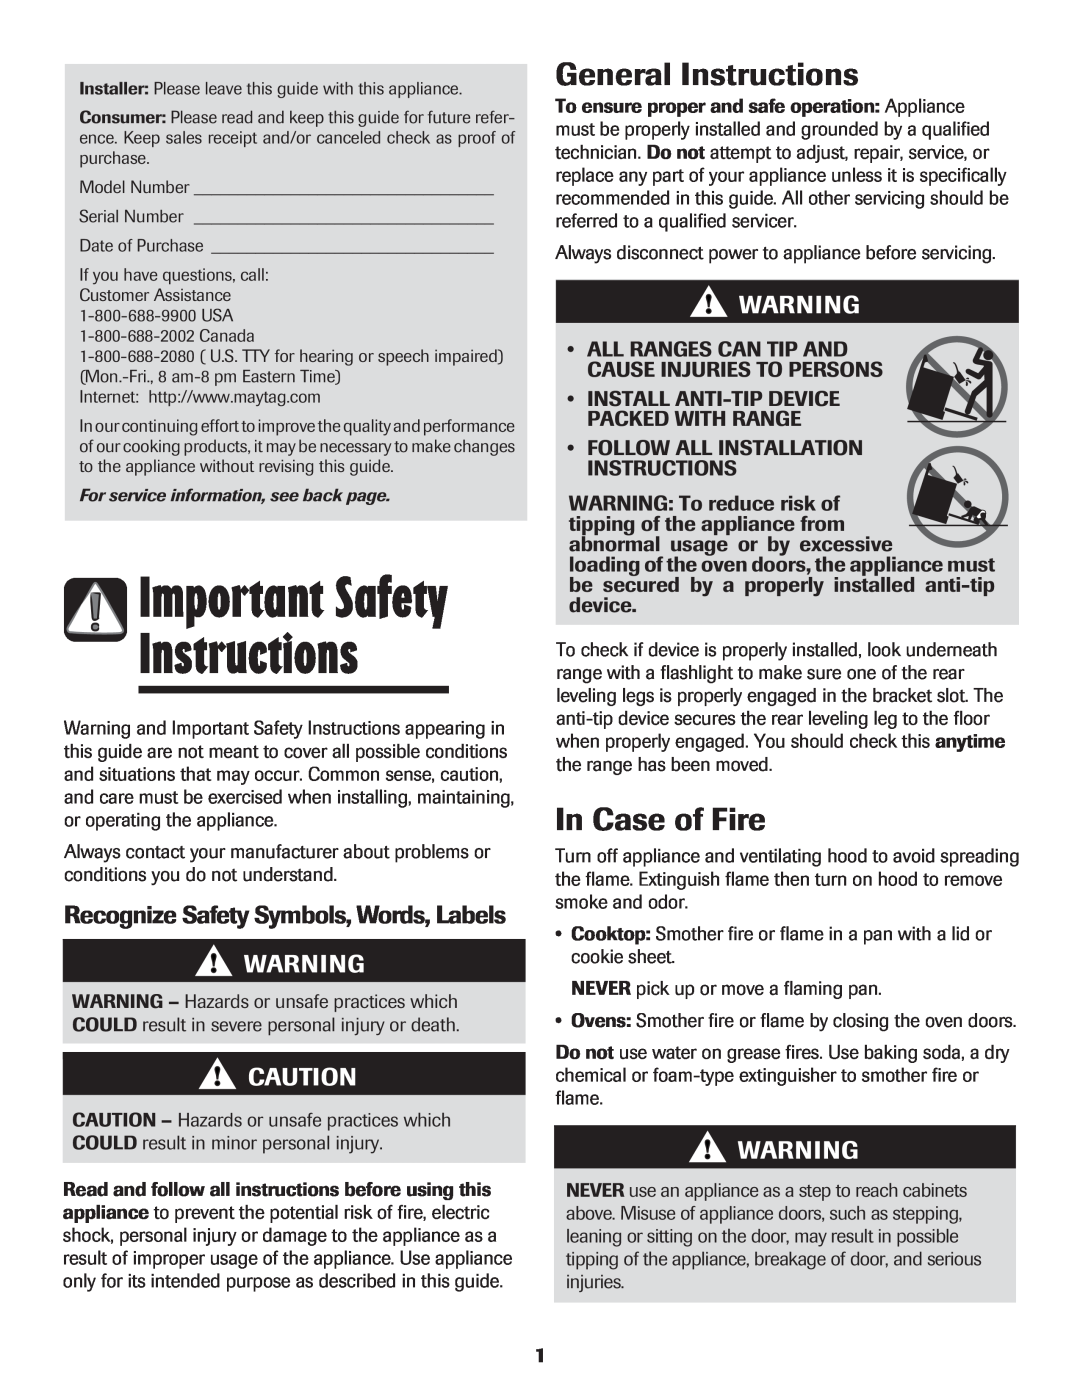 Maytag 500 Series Important Safety, General Instructions, In Case of Fire, Recognize Safety Symbols, Words, Labels 